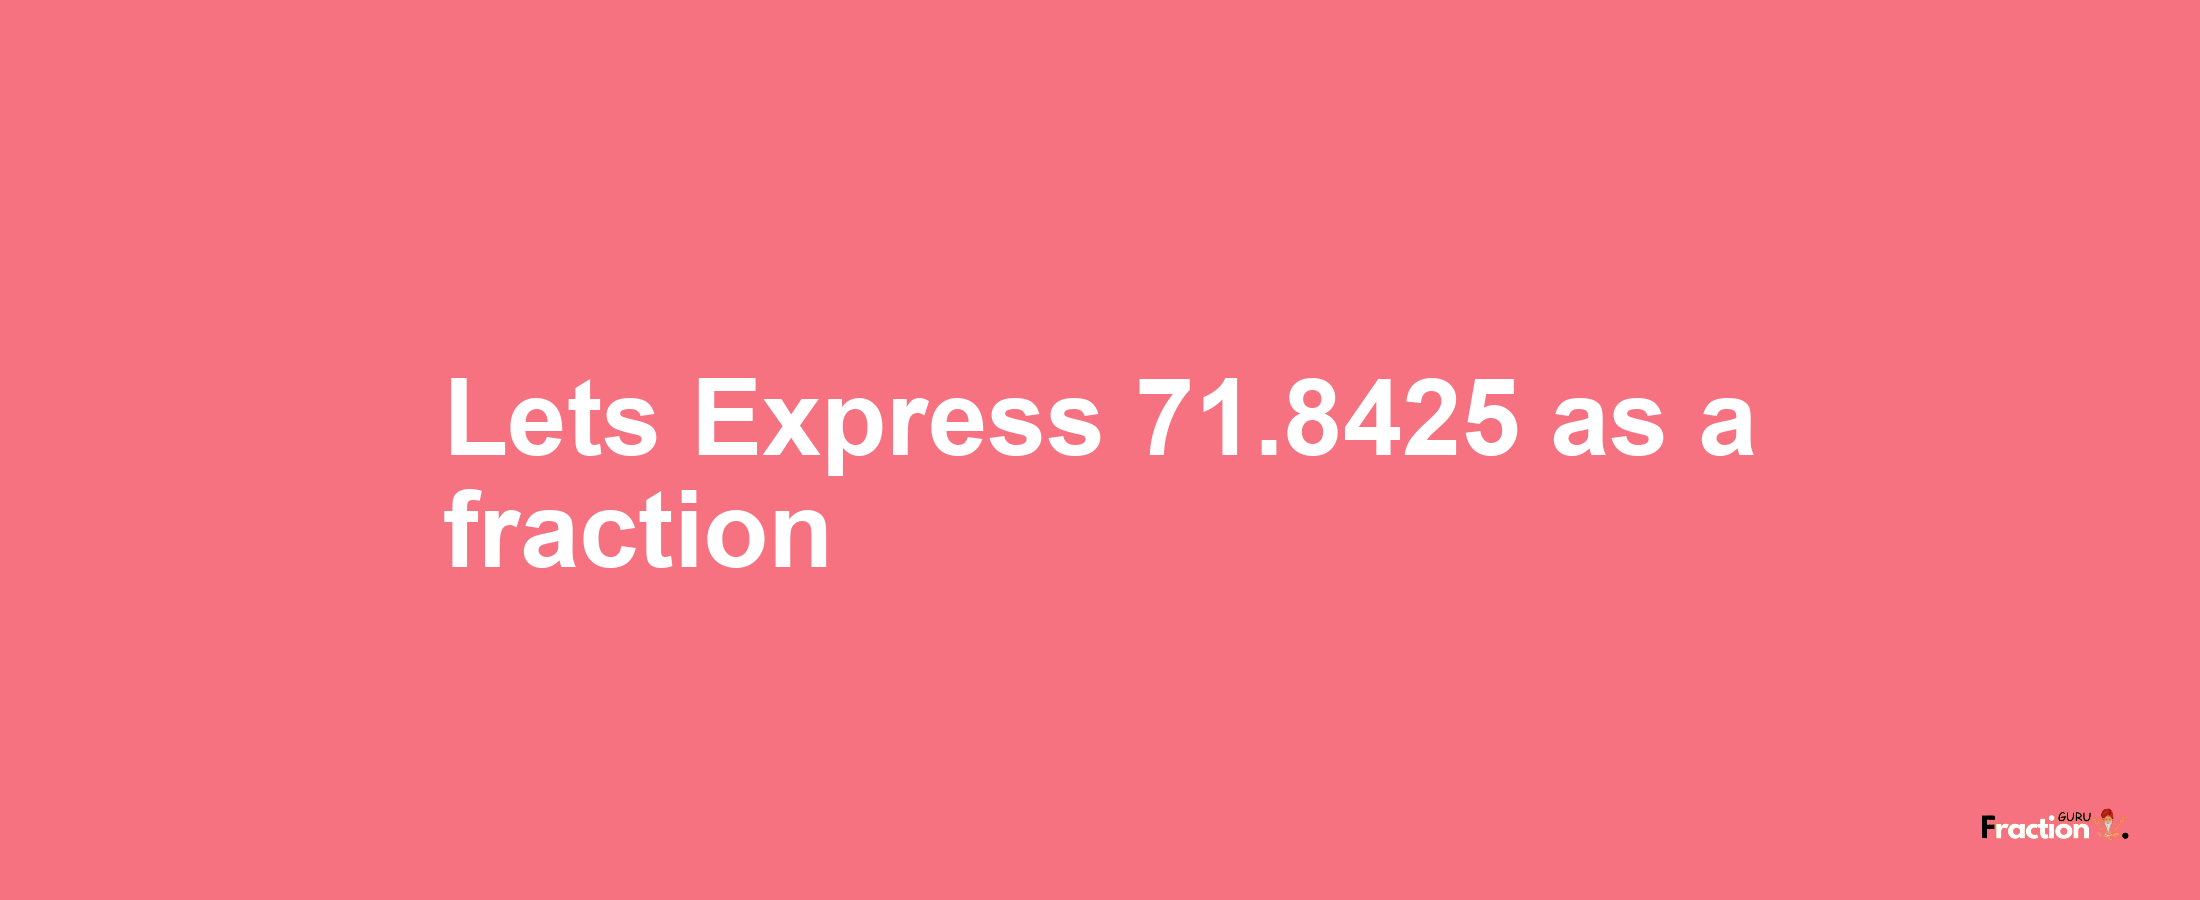 Lets Express 71.8425 as afraction